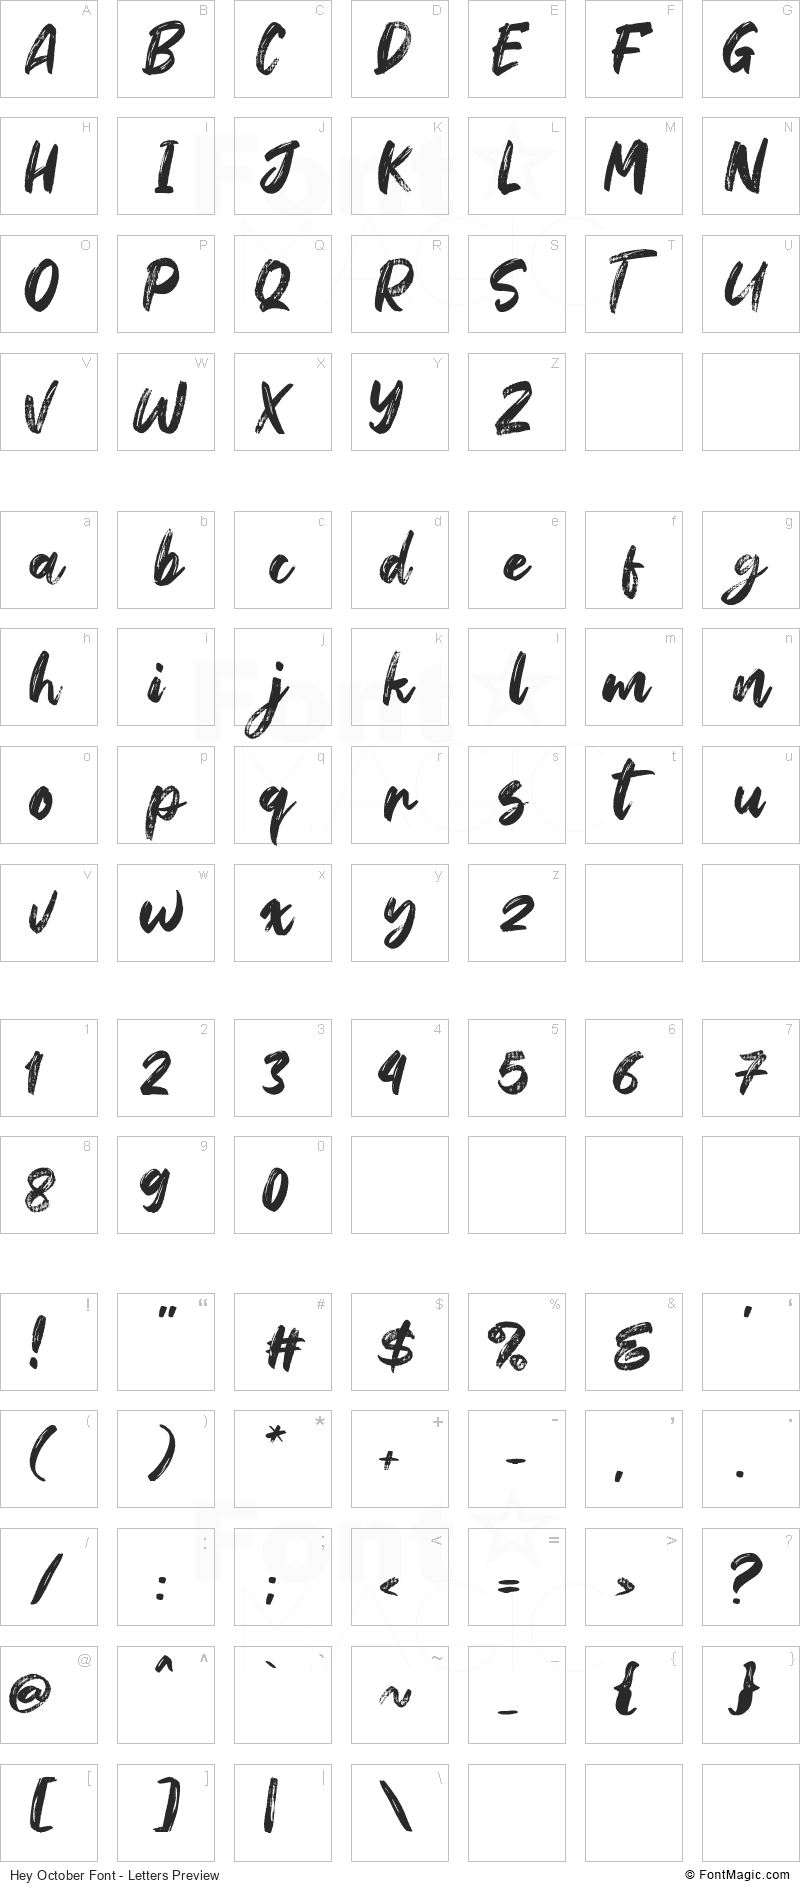 Hey October Font - All Latters Preview Chart